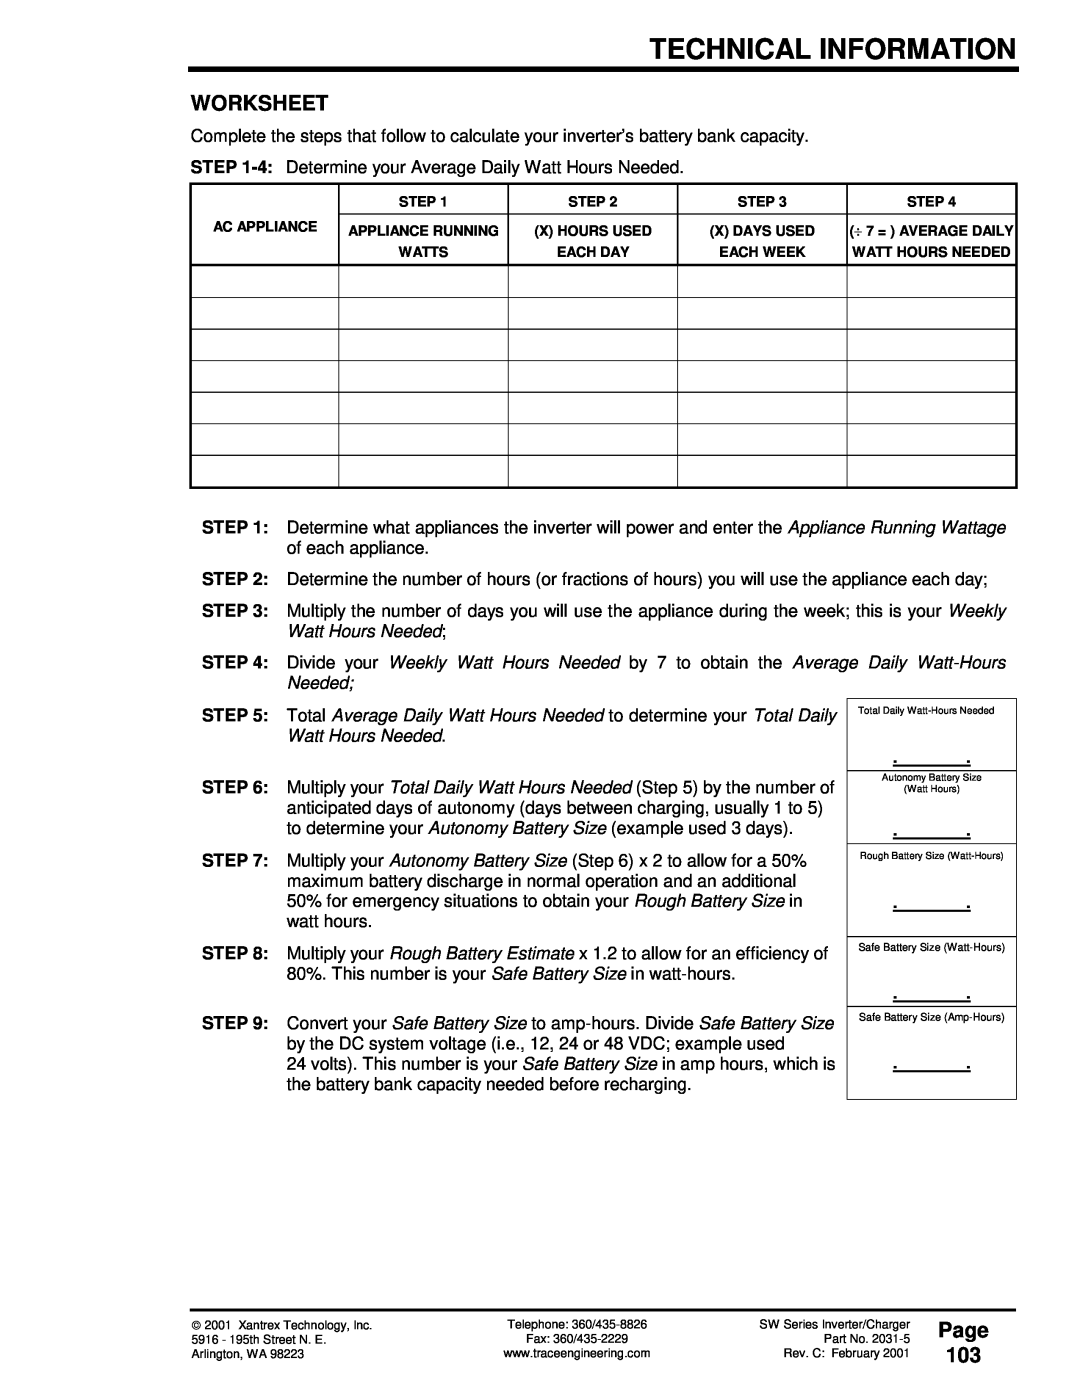 Xantrex Technology SW Series owner manual Worksheet, Page 103, Technical Information 